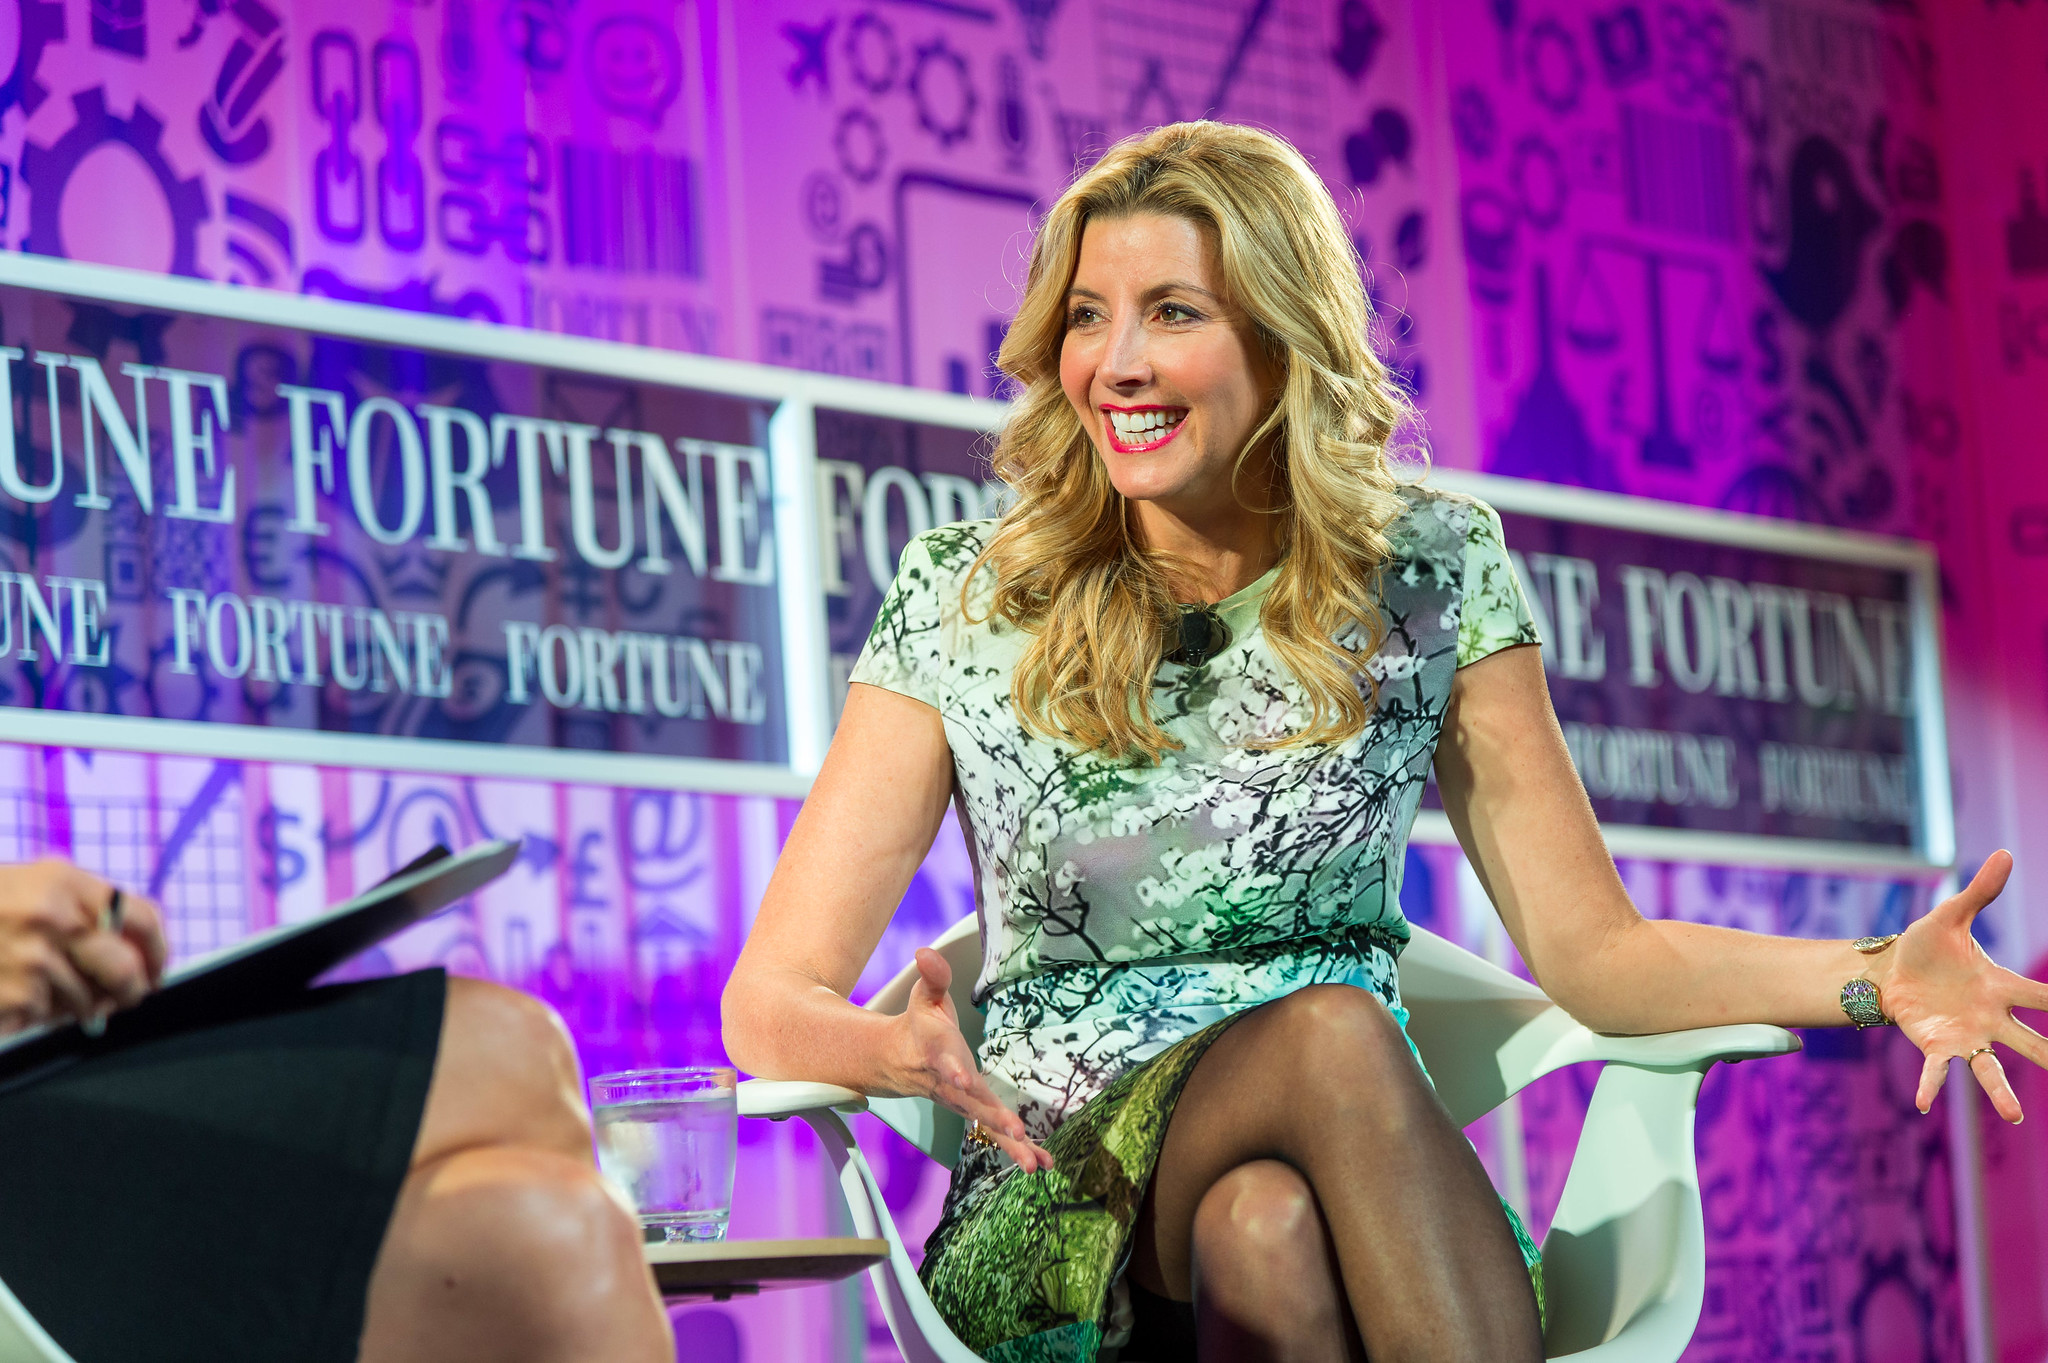 Spanx CEO Sara Blakely: Fears 'I'm working on' for success